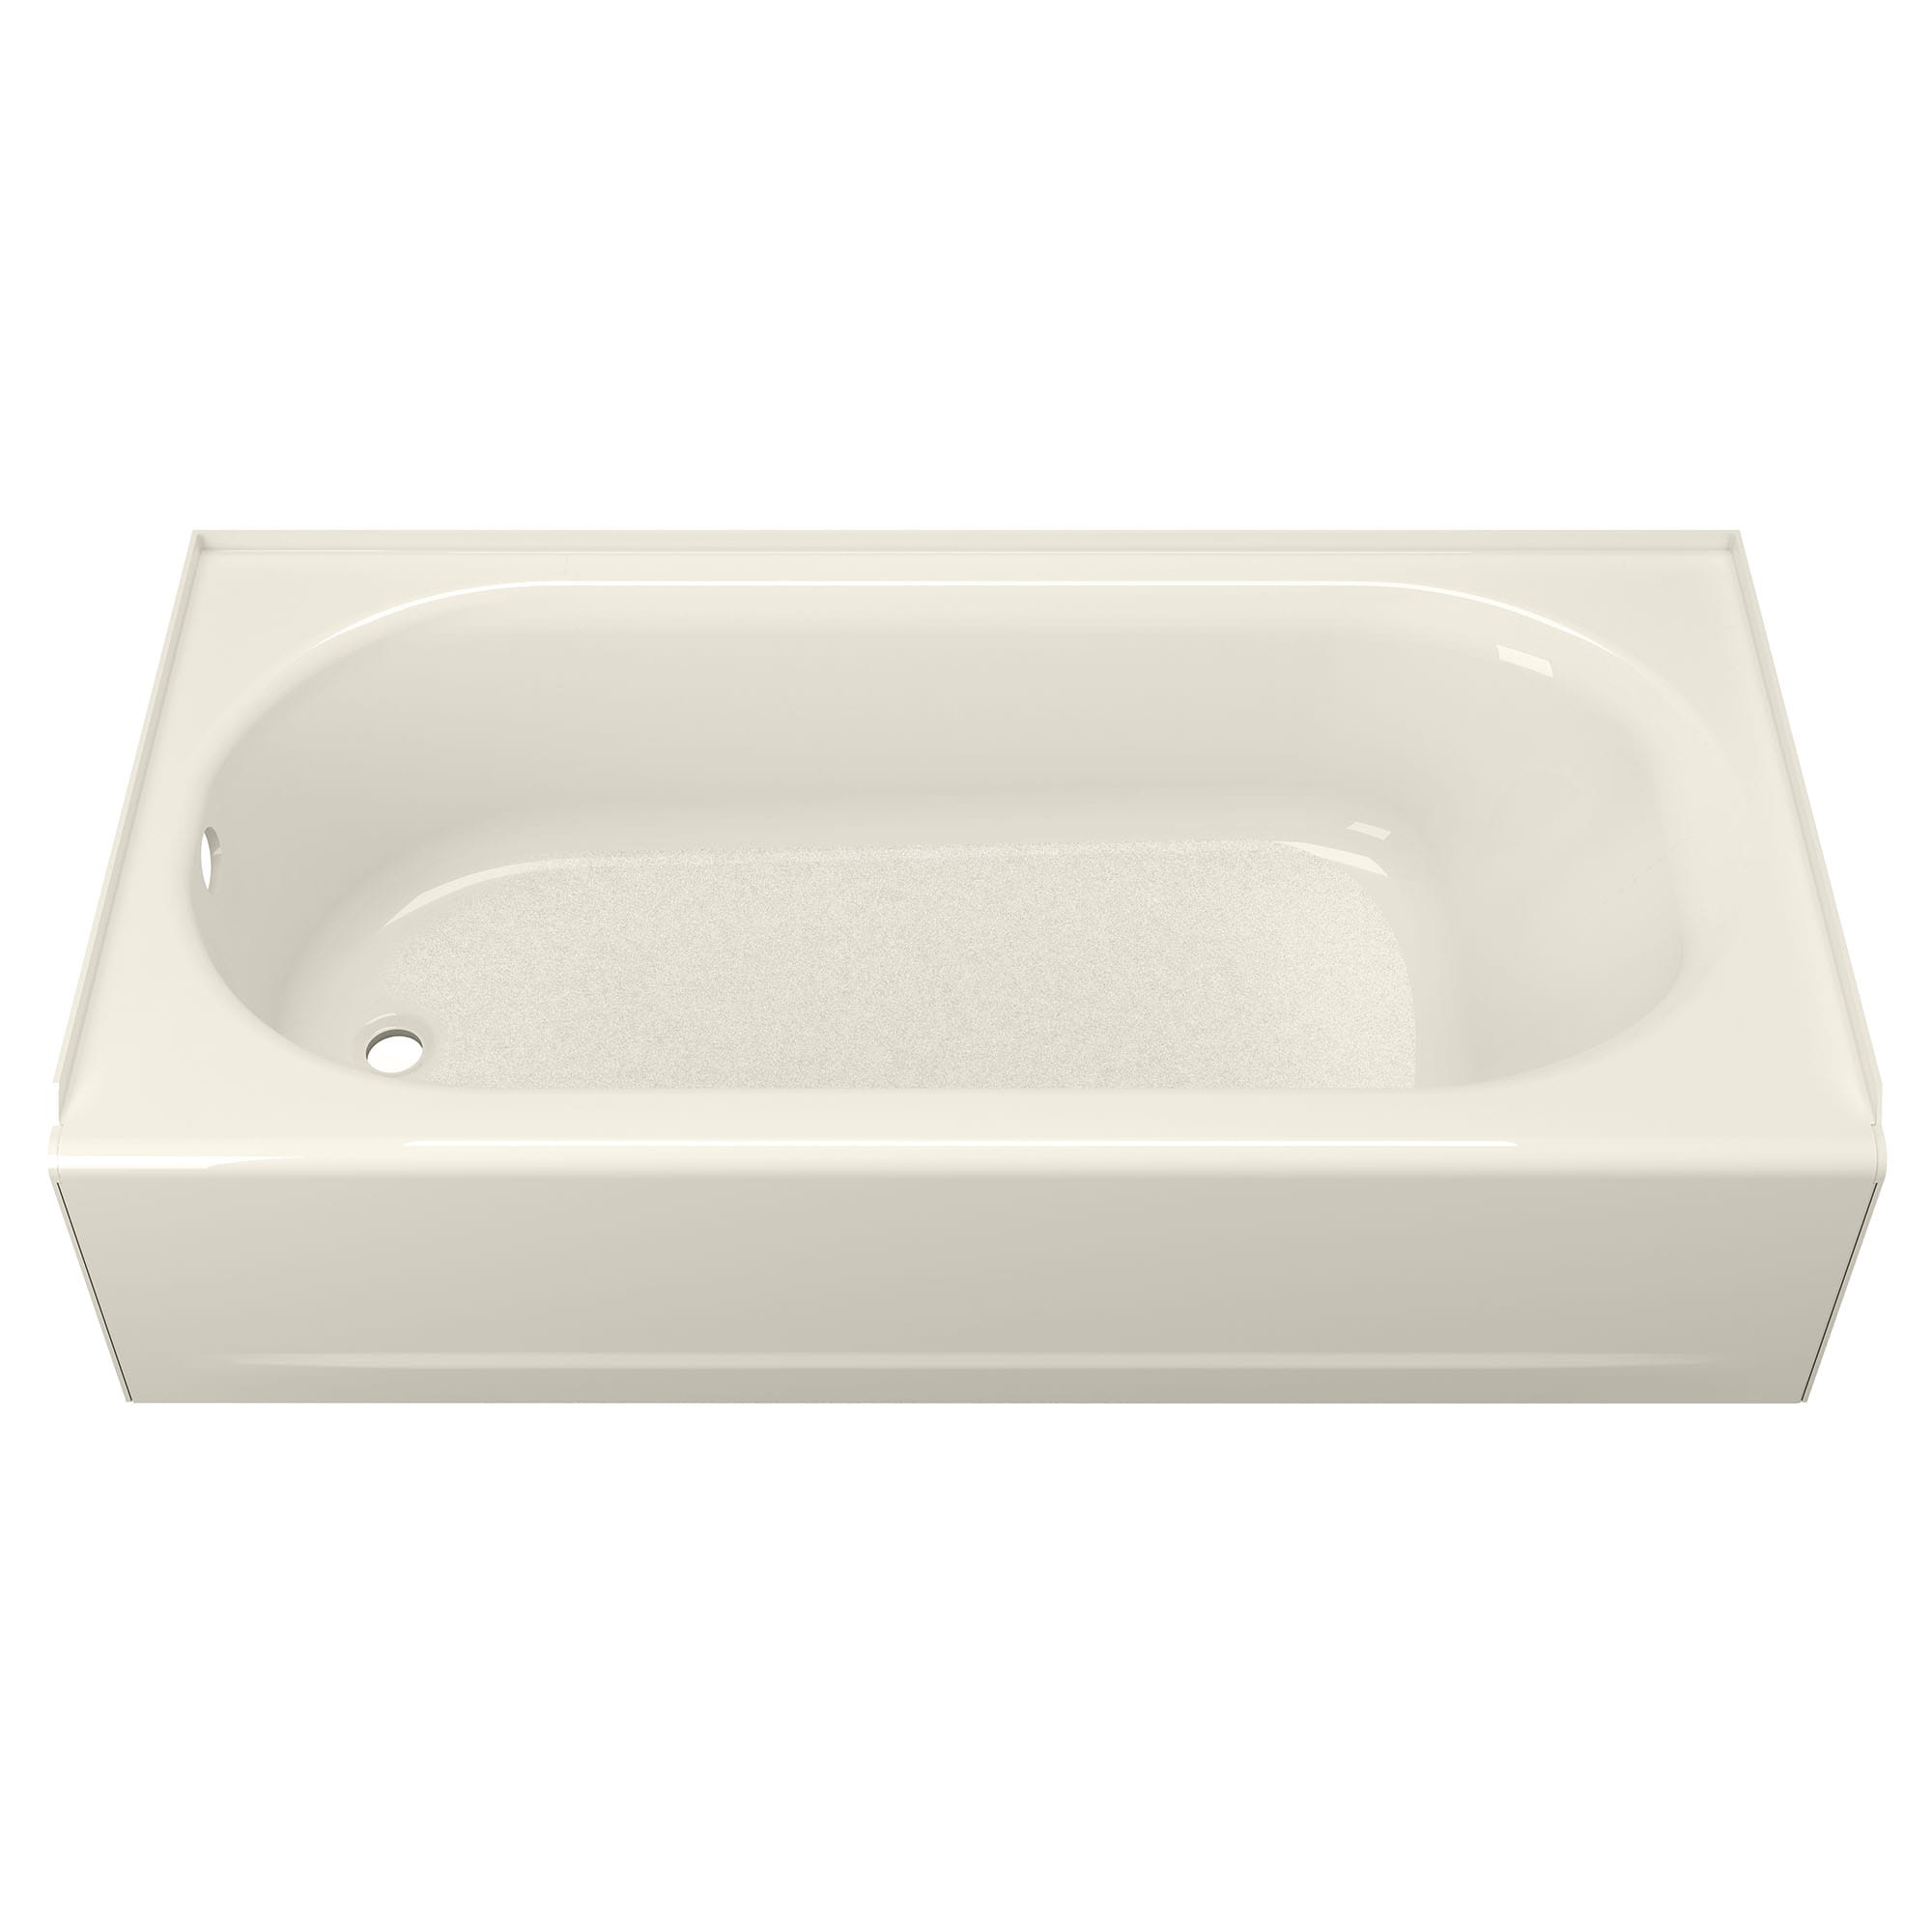 Princeton Americast 60 x 30 Inch Integral Apron Bathtub With Left Hand Outlet LINEN